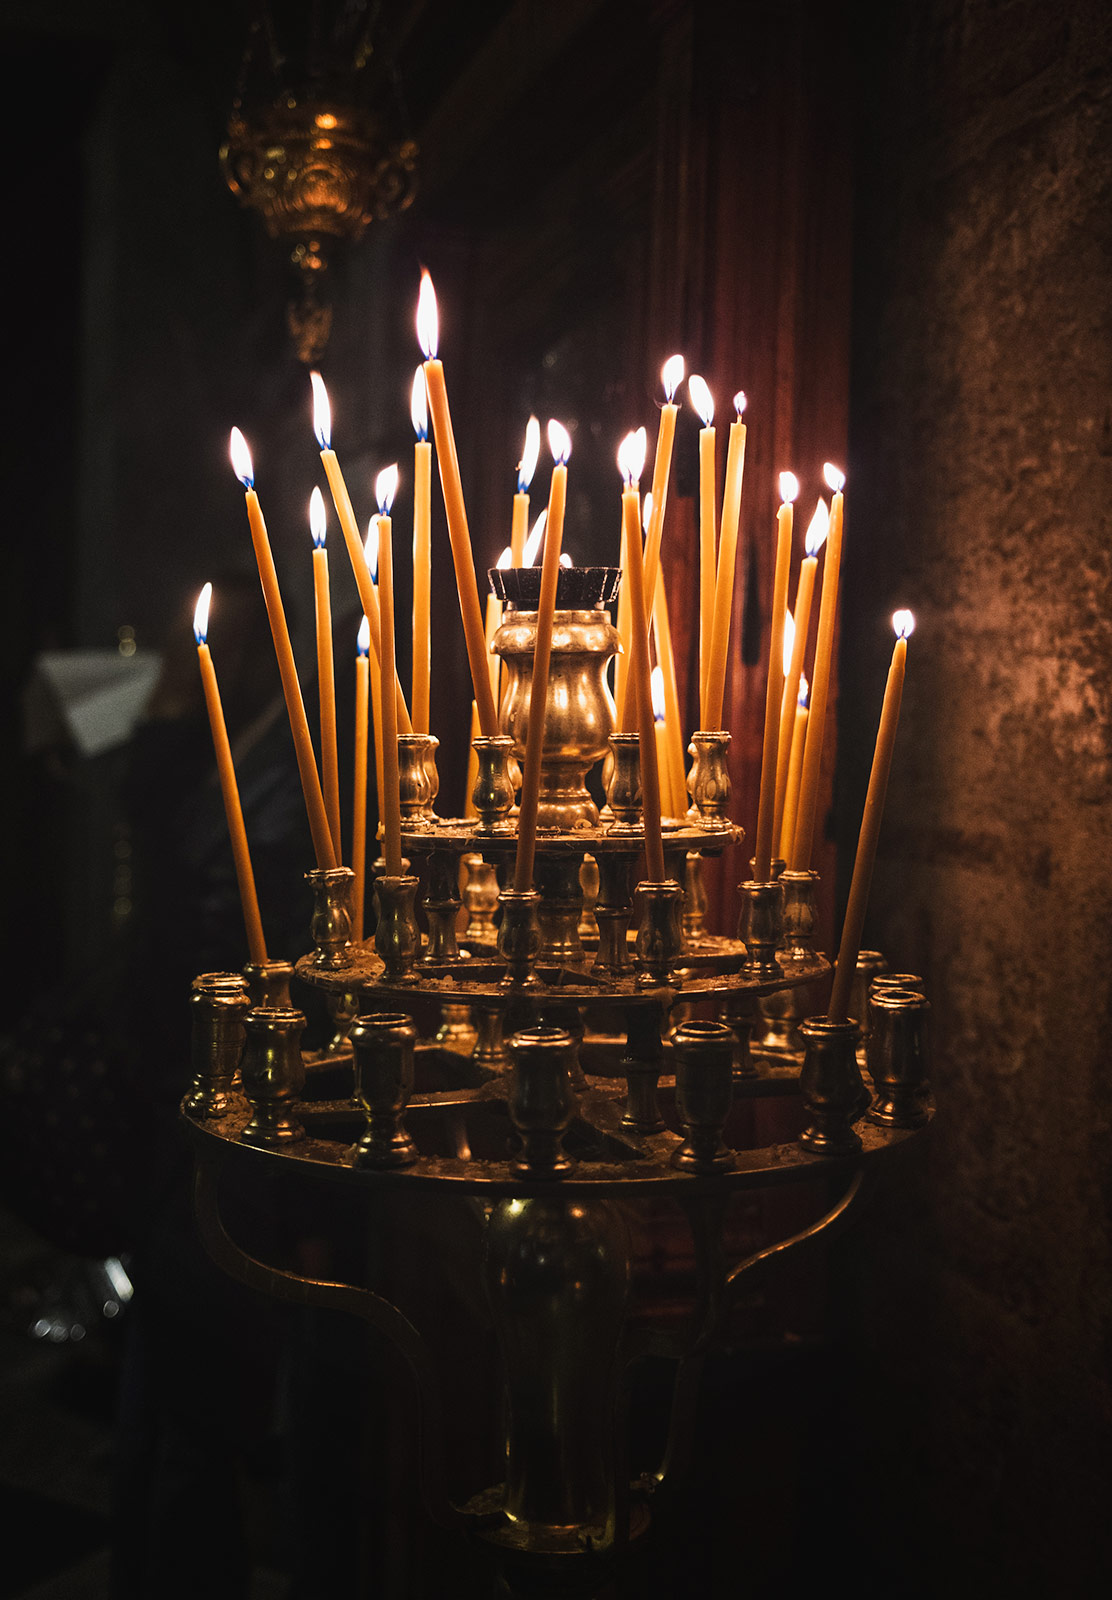 Cluster of burning church candles